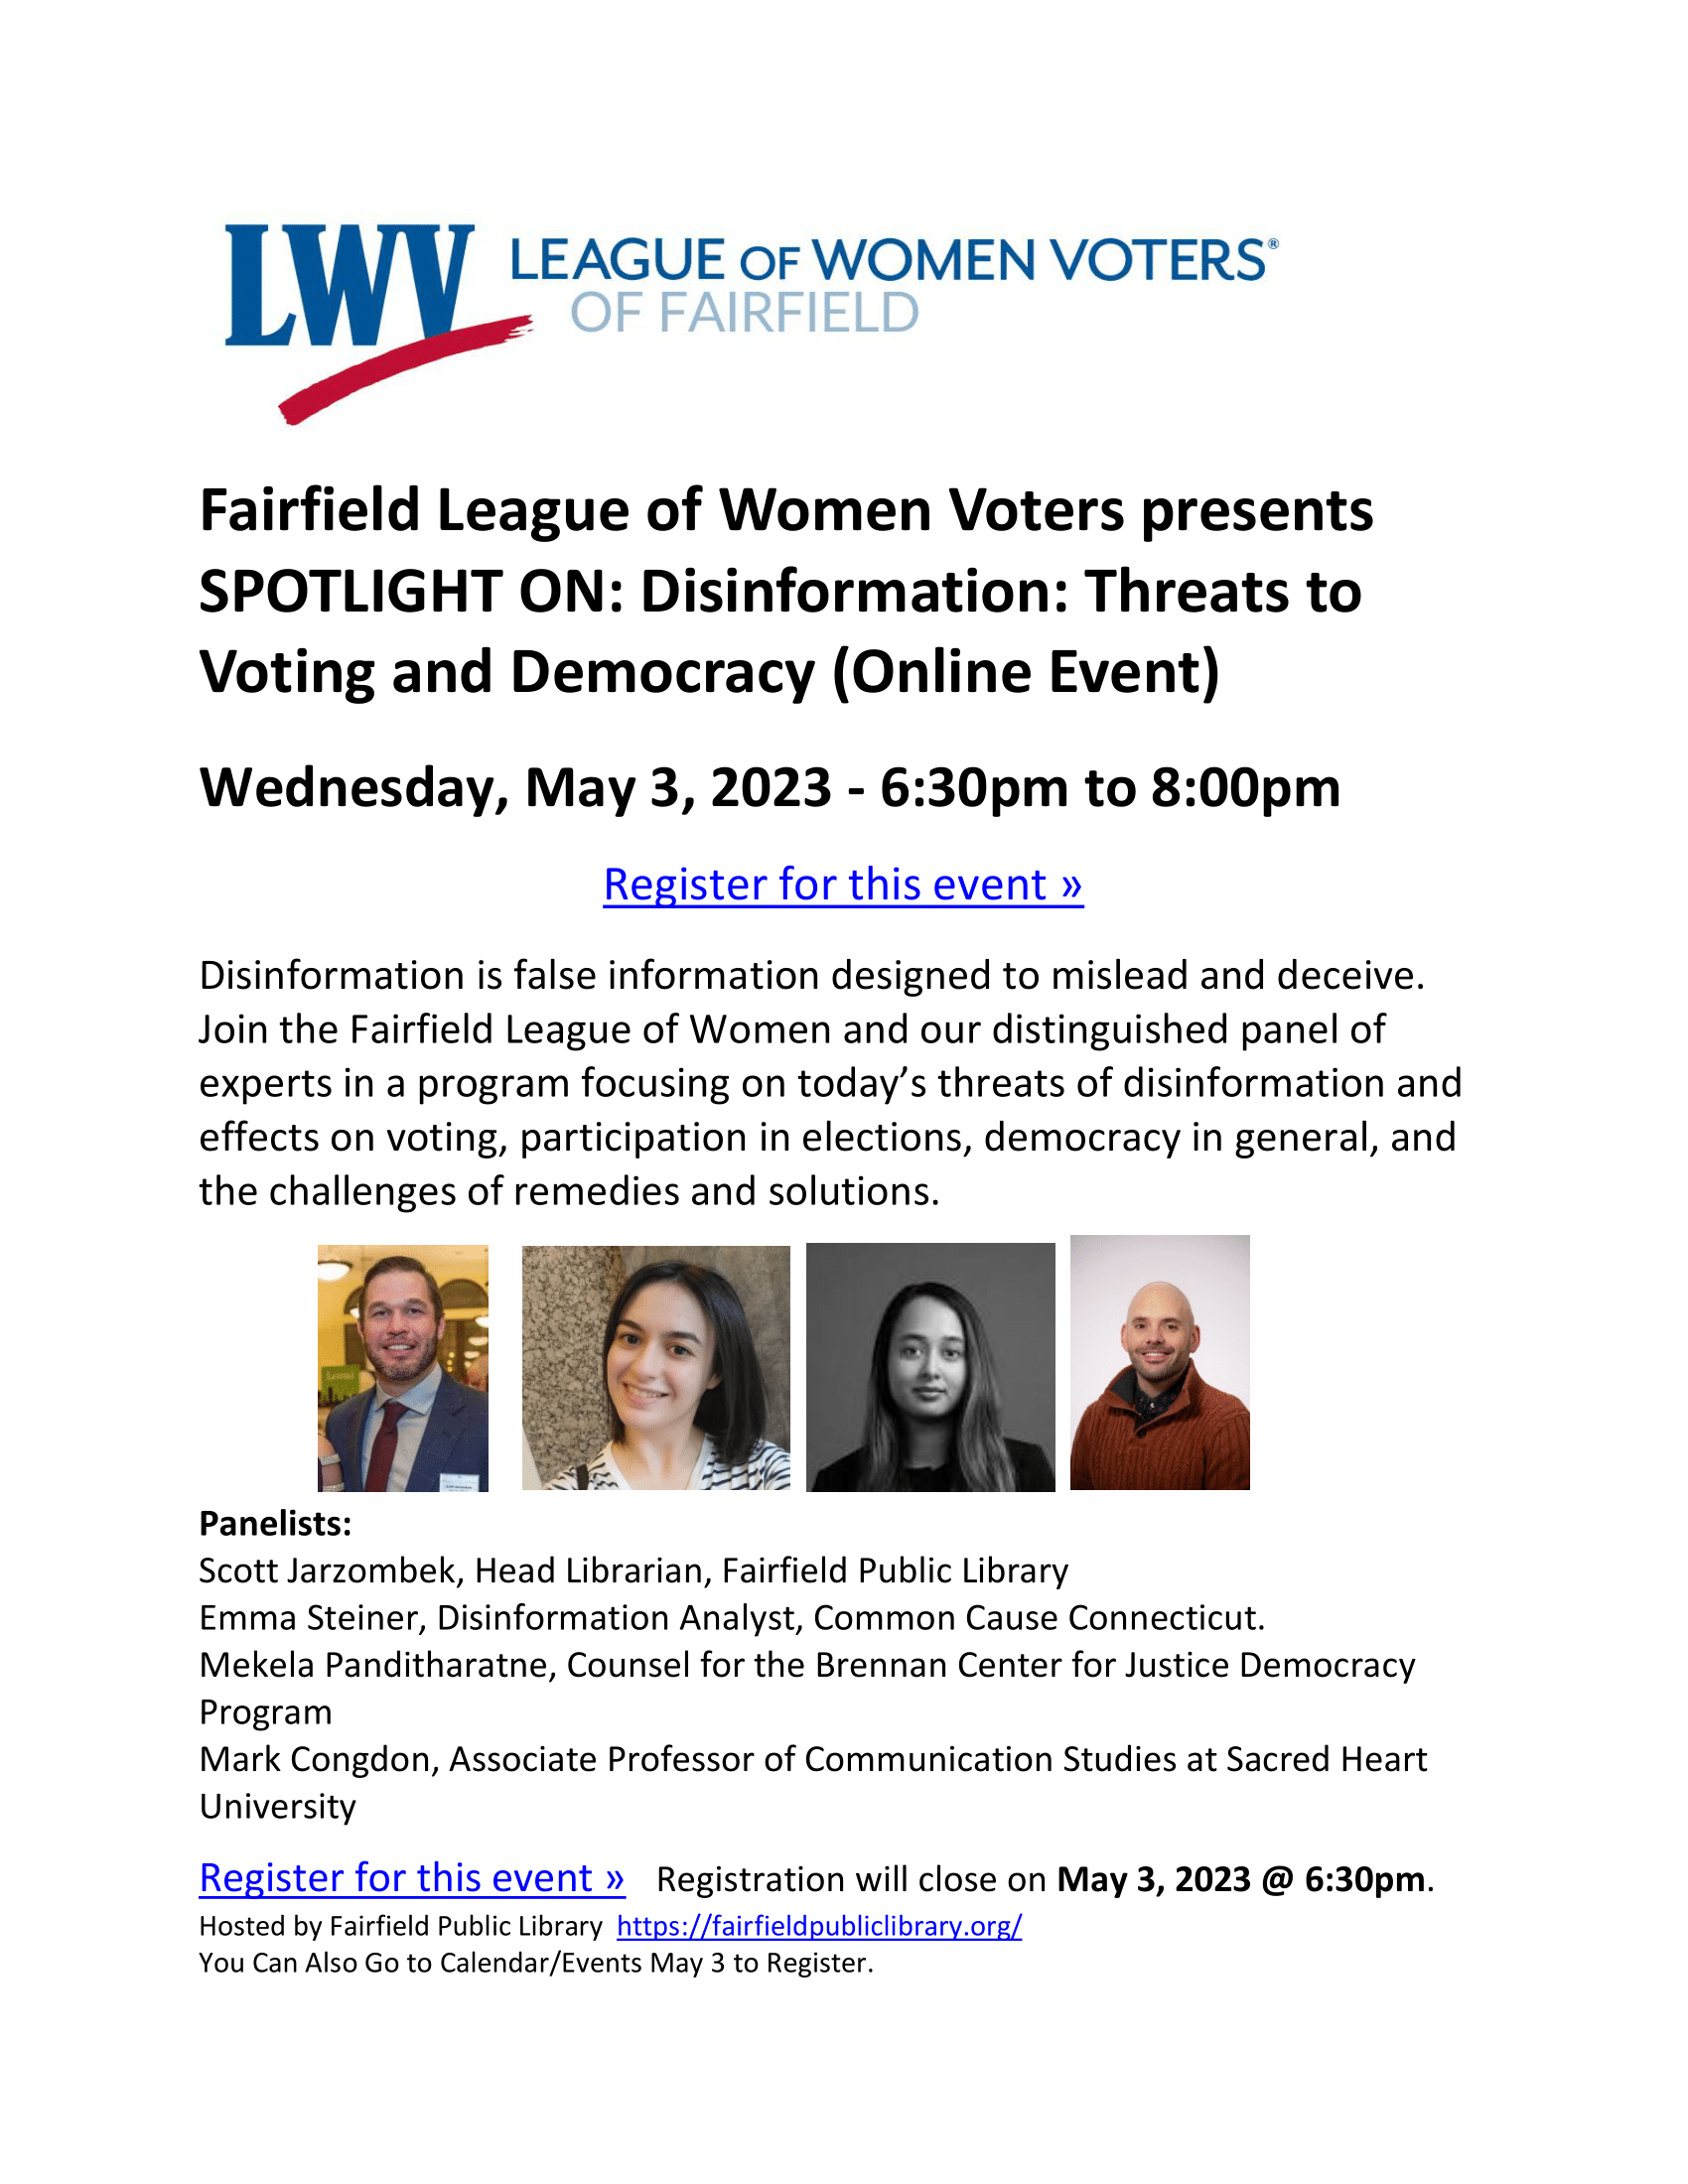 Event flyer for disinformation talk with LWV Fairfield. Has 4 panelist headshots in the center of the flyer info